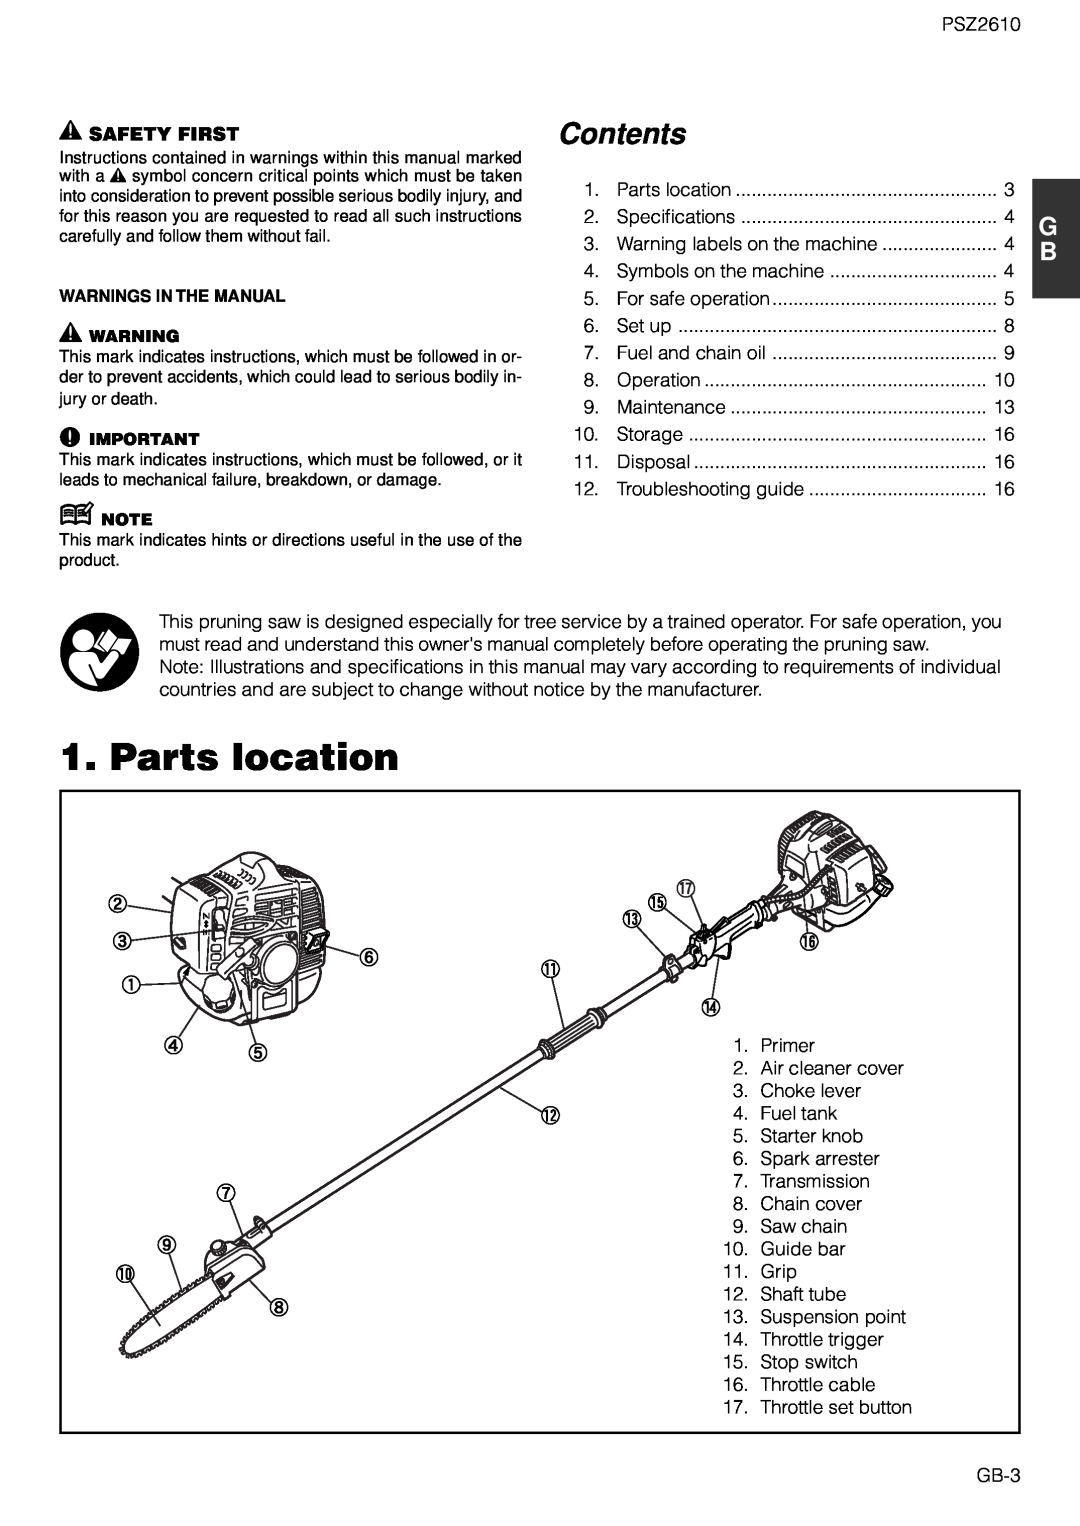 Zenoah PSZ2610 owner manual Parts location, Safety First, Contents 